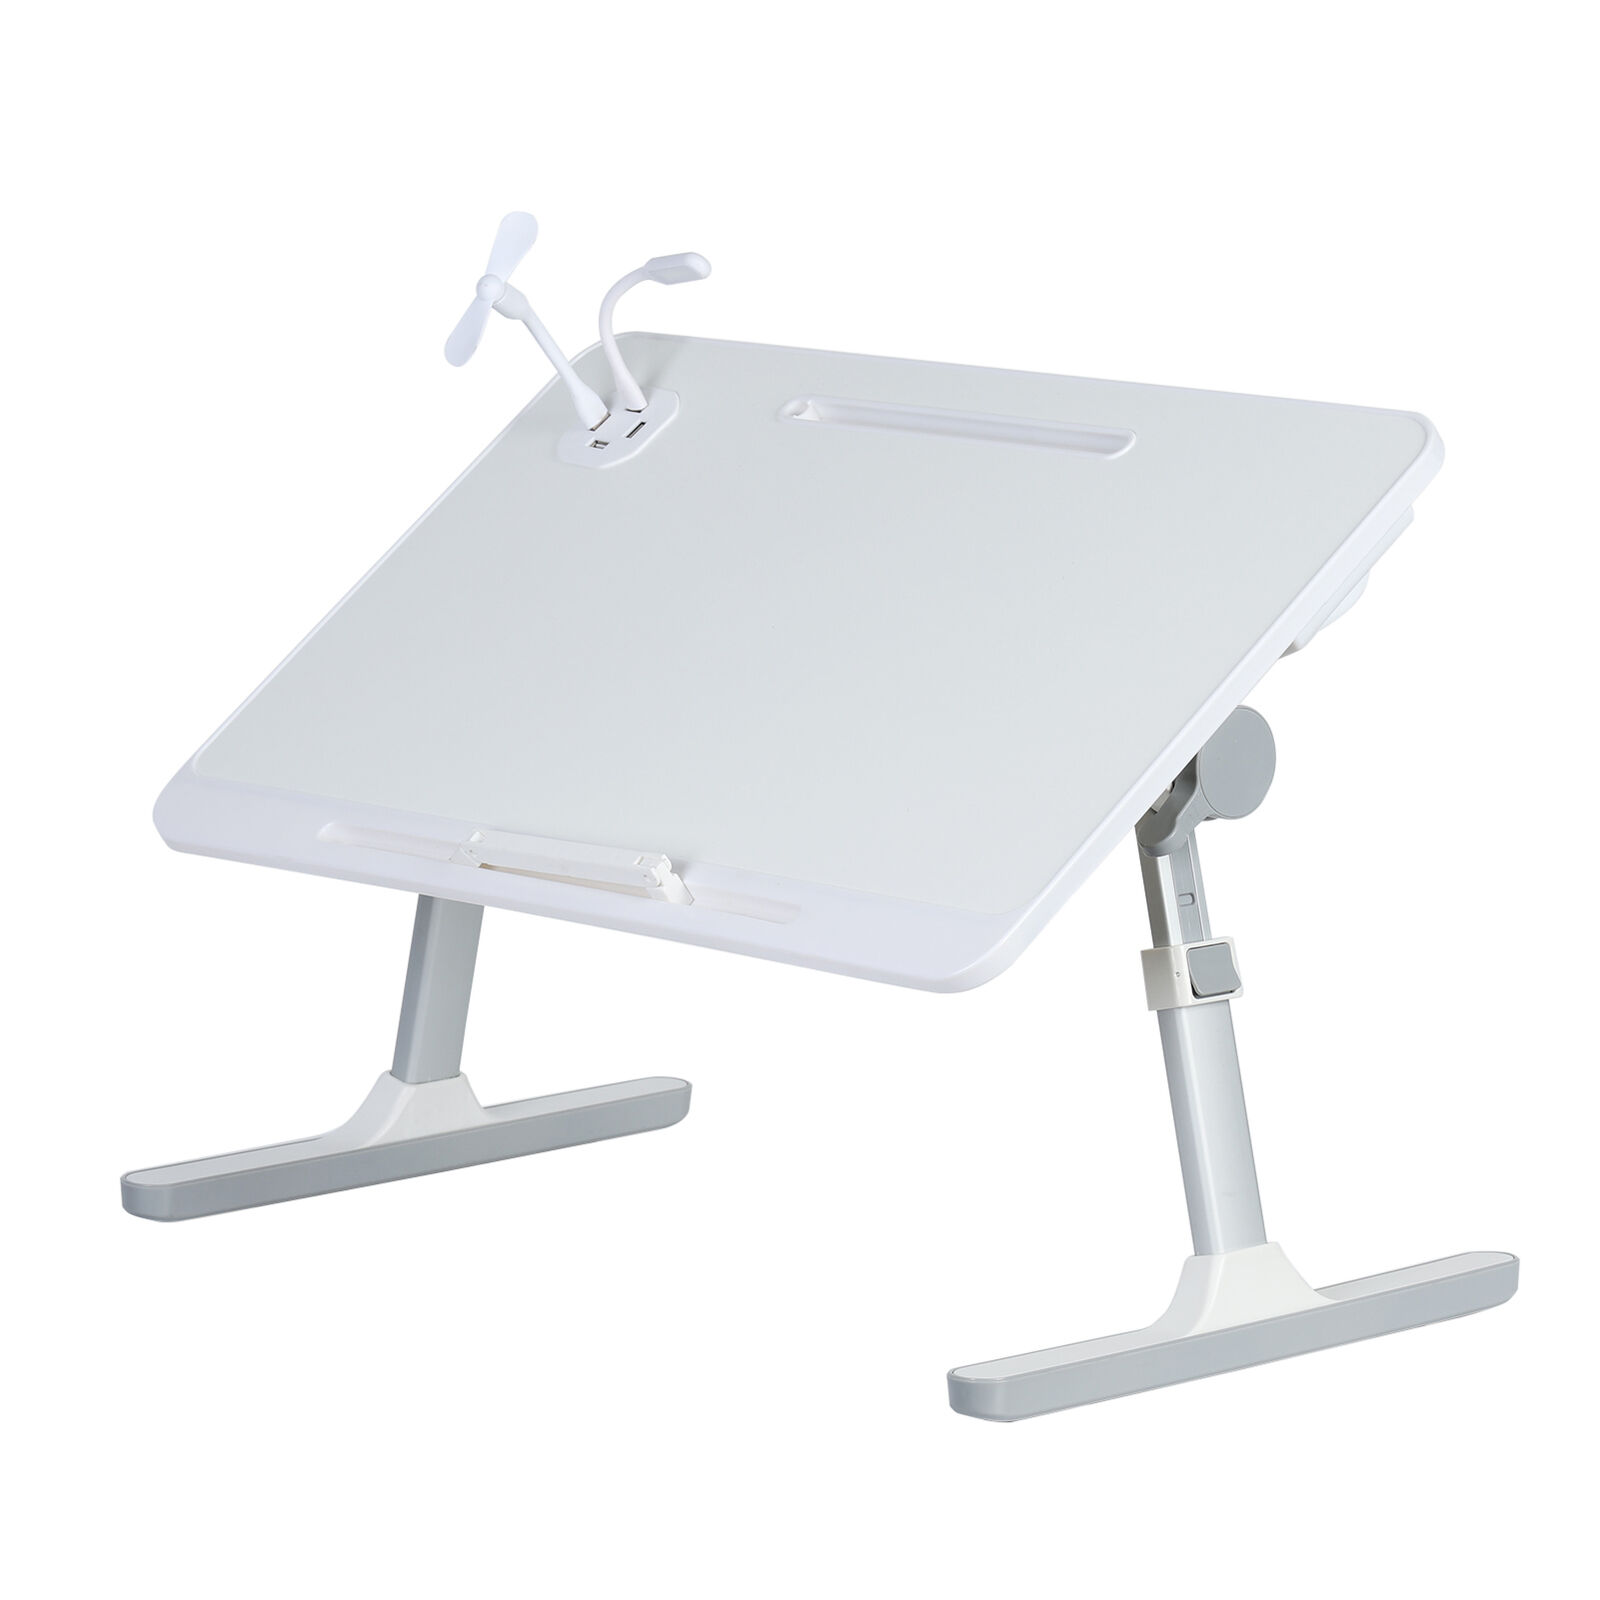 Laptop computer bed tray table foldable lifting computer bed frame 